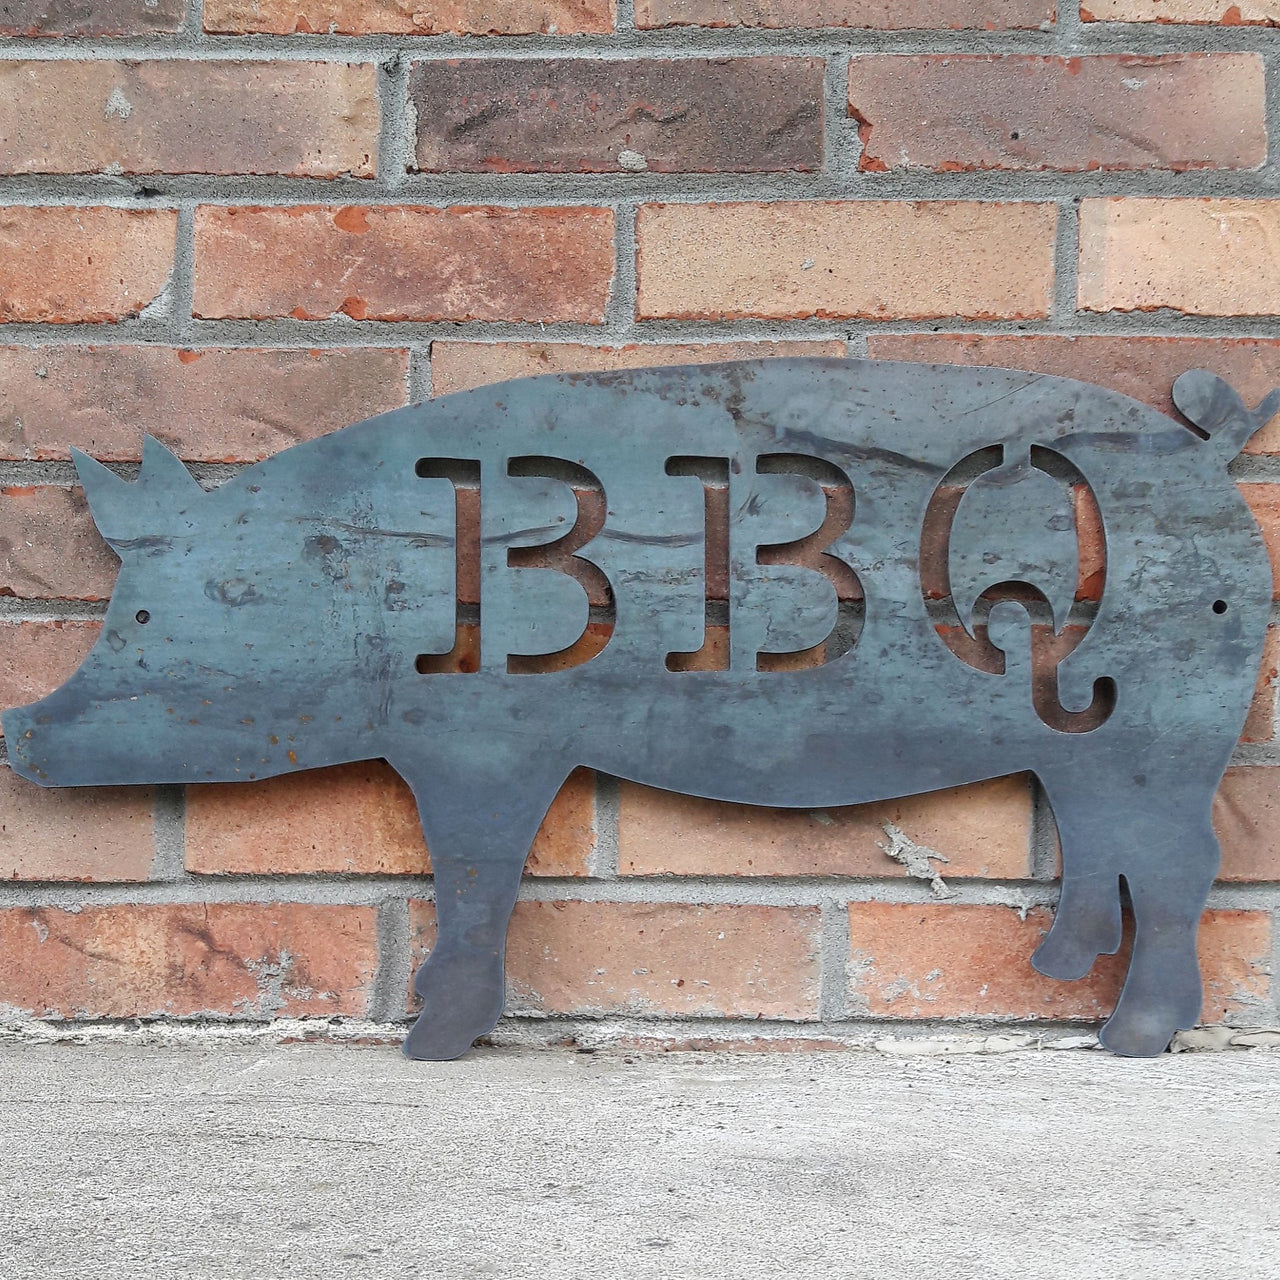 This is a metal sign in the shape of pig with two 1/4" mounting holes. The sig reads, "BBQ"